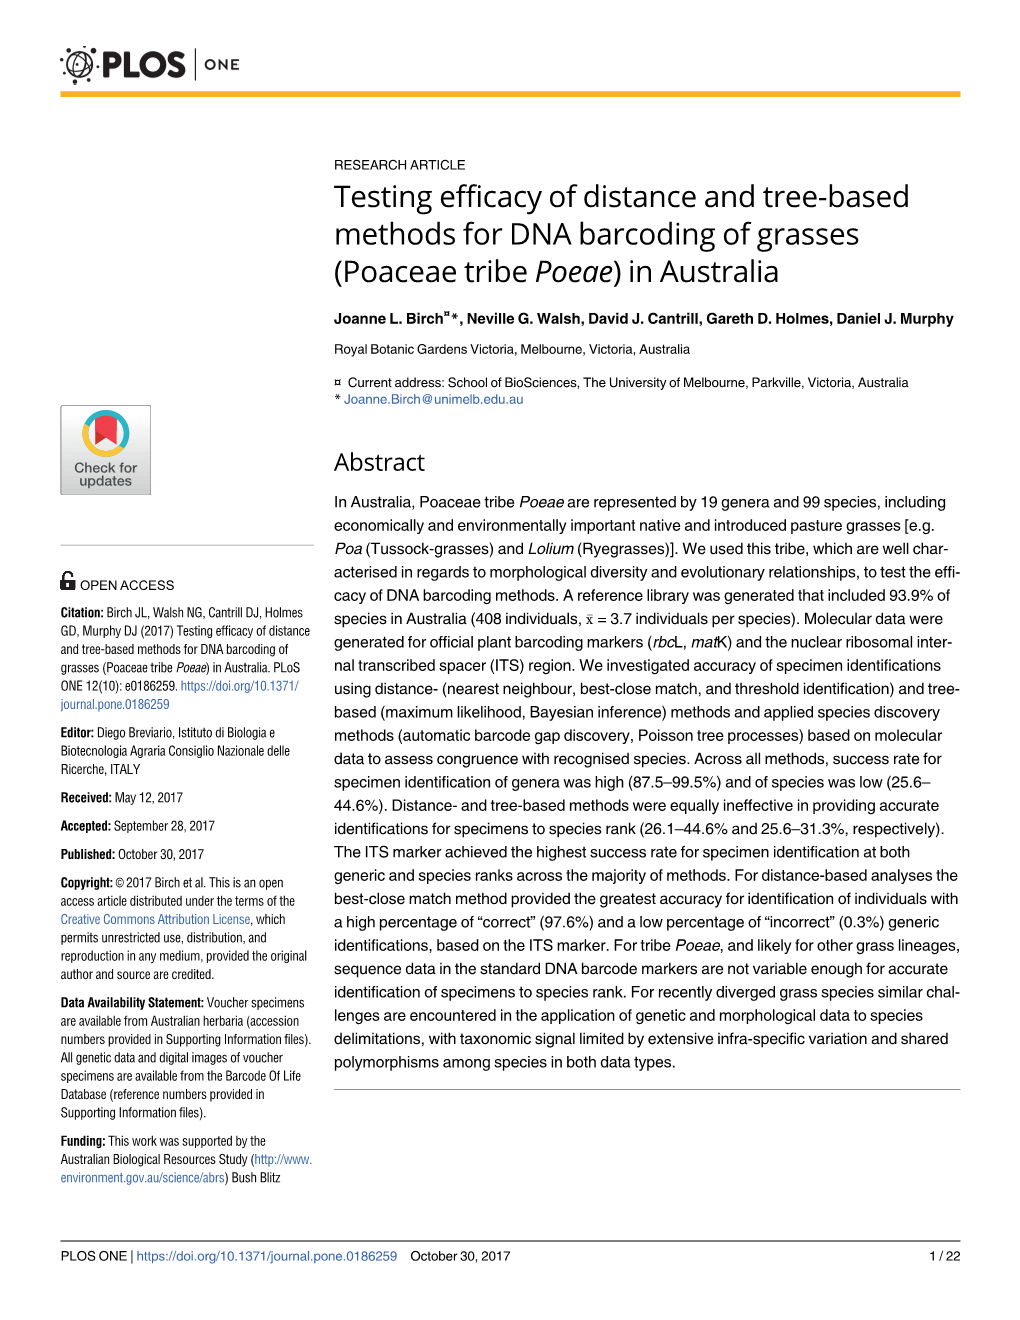 Testing Efficacy of Distance and Tree-Based Methods for DNA Barcoding of Grasses (Poaceae Tribe Poeae) in Australia